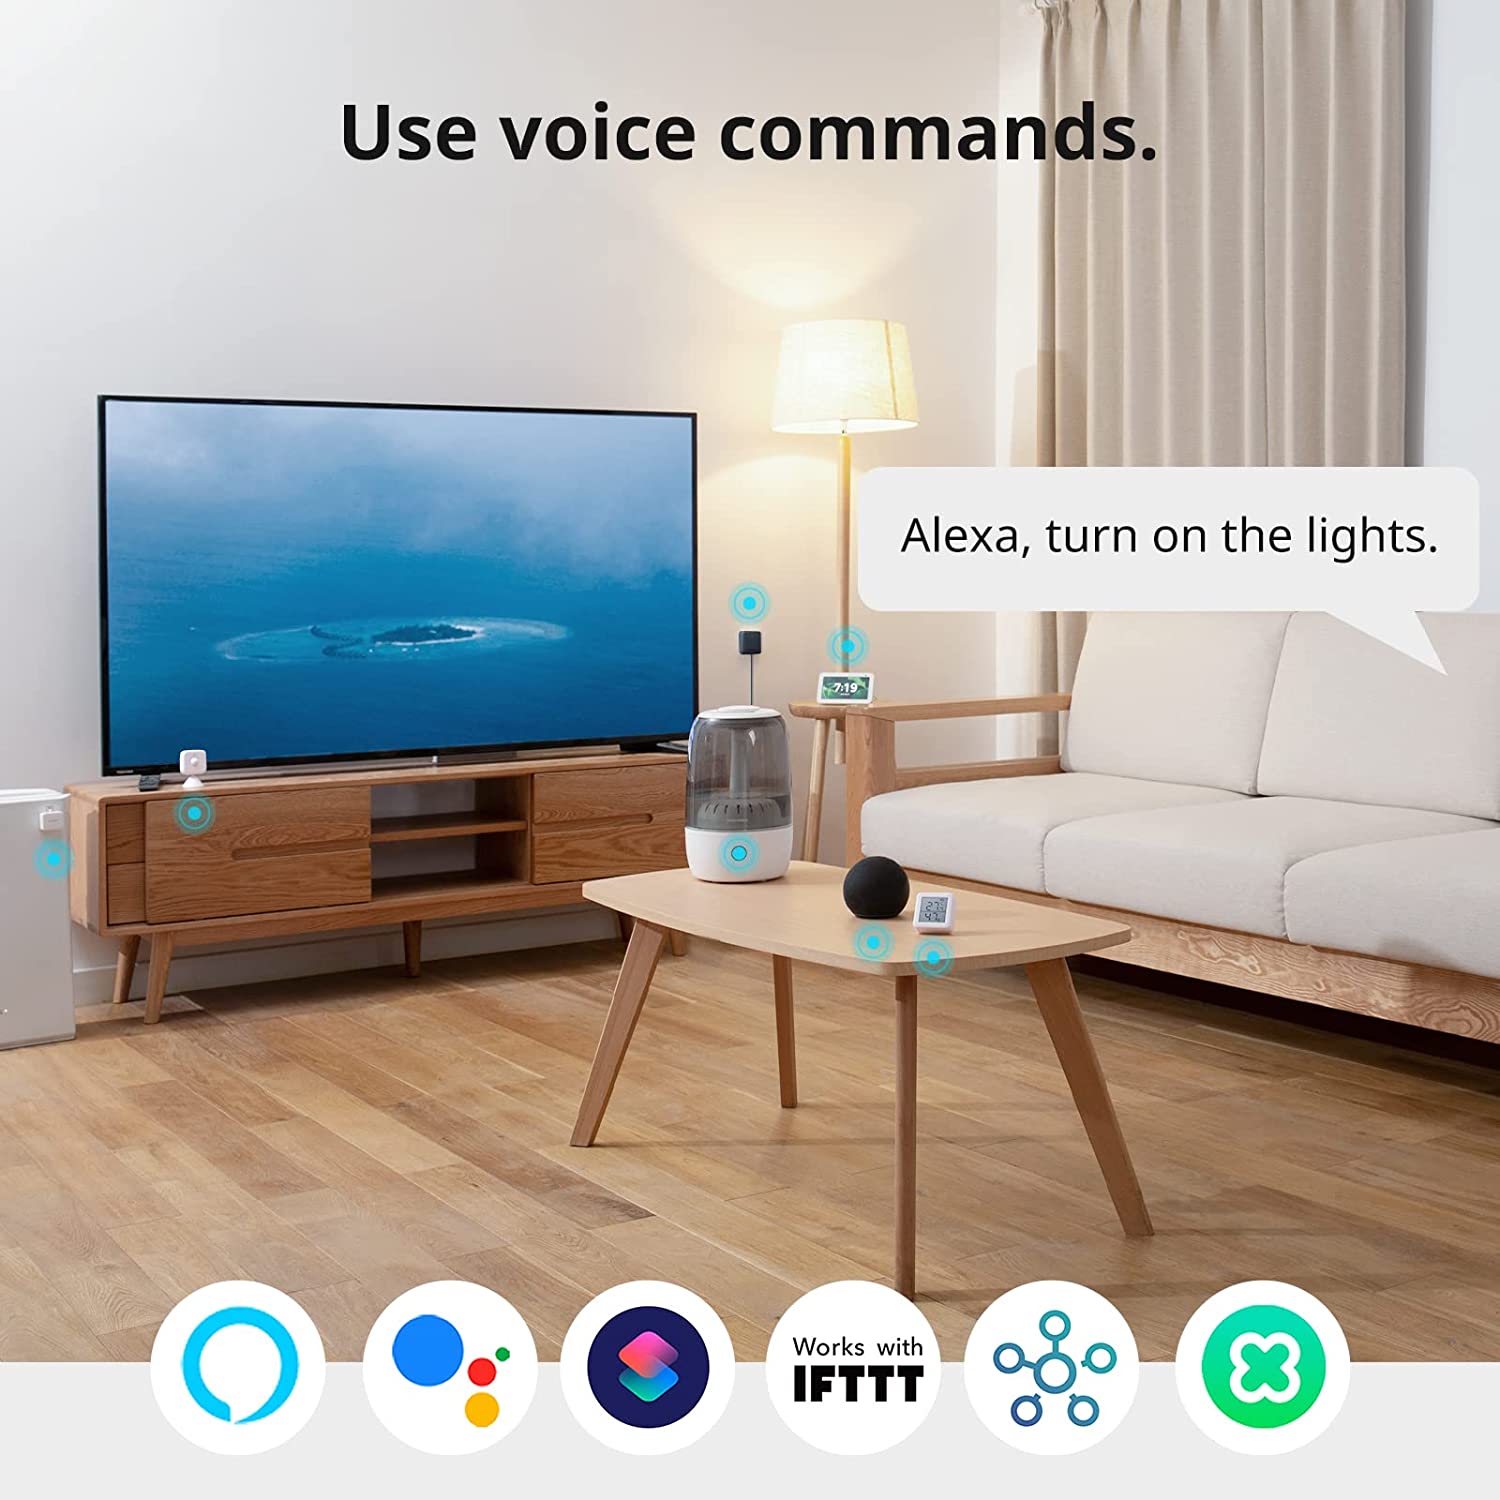 SwitchBot Bot 3Pack with Hub Mini - Smart Switch Button Pusher, Wireless  App & Timer Control, Compatible with Alexa, Google Home, IFTTT, Easy to  Use